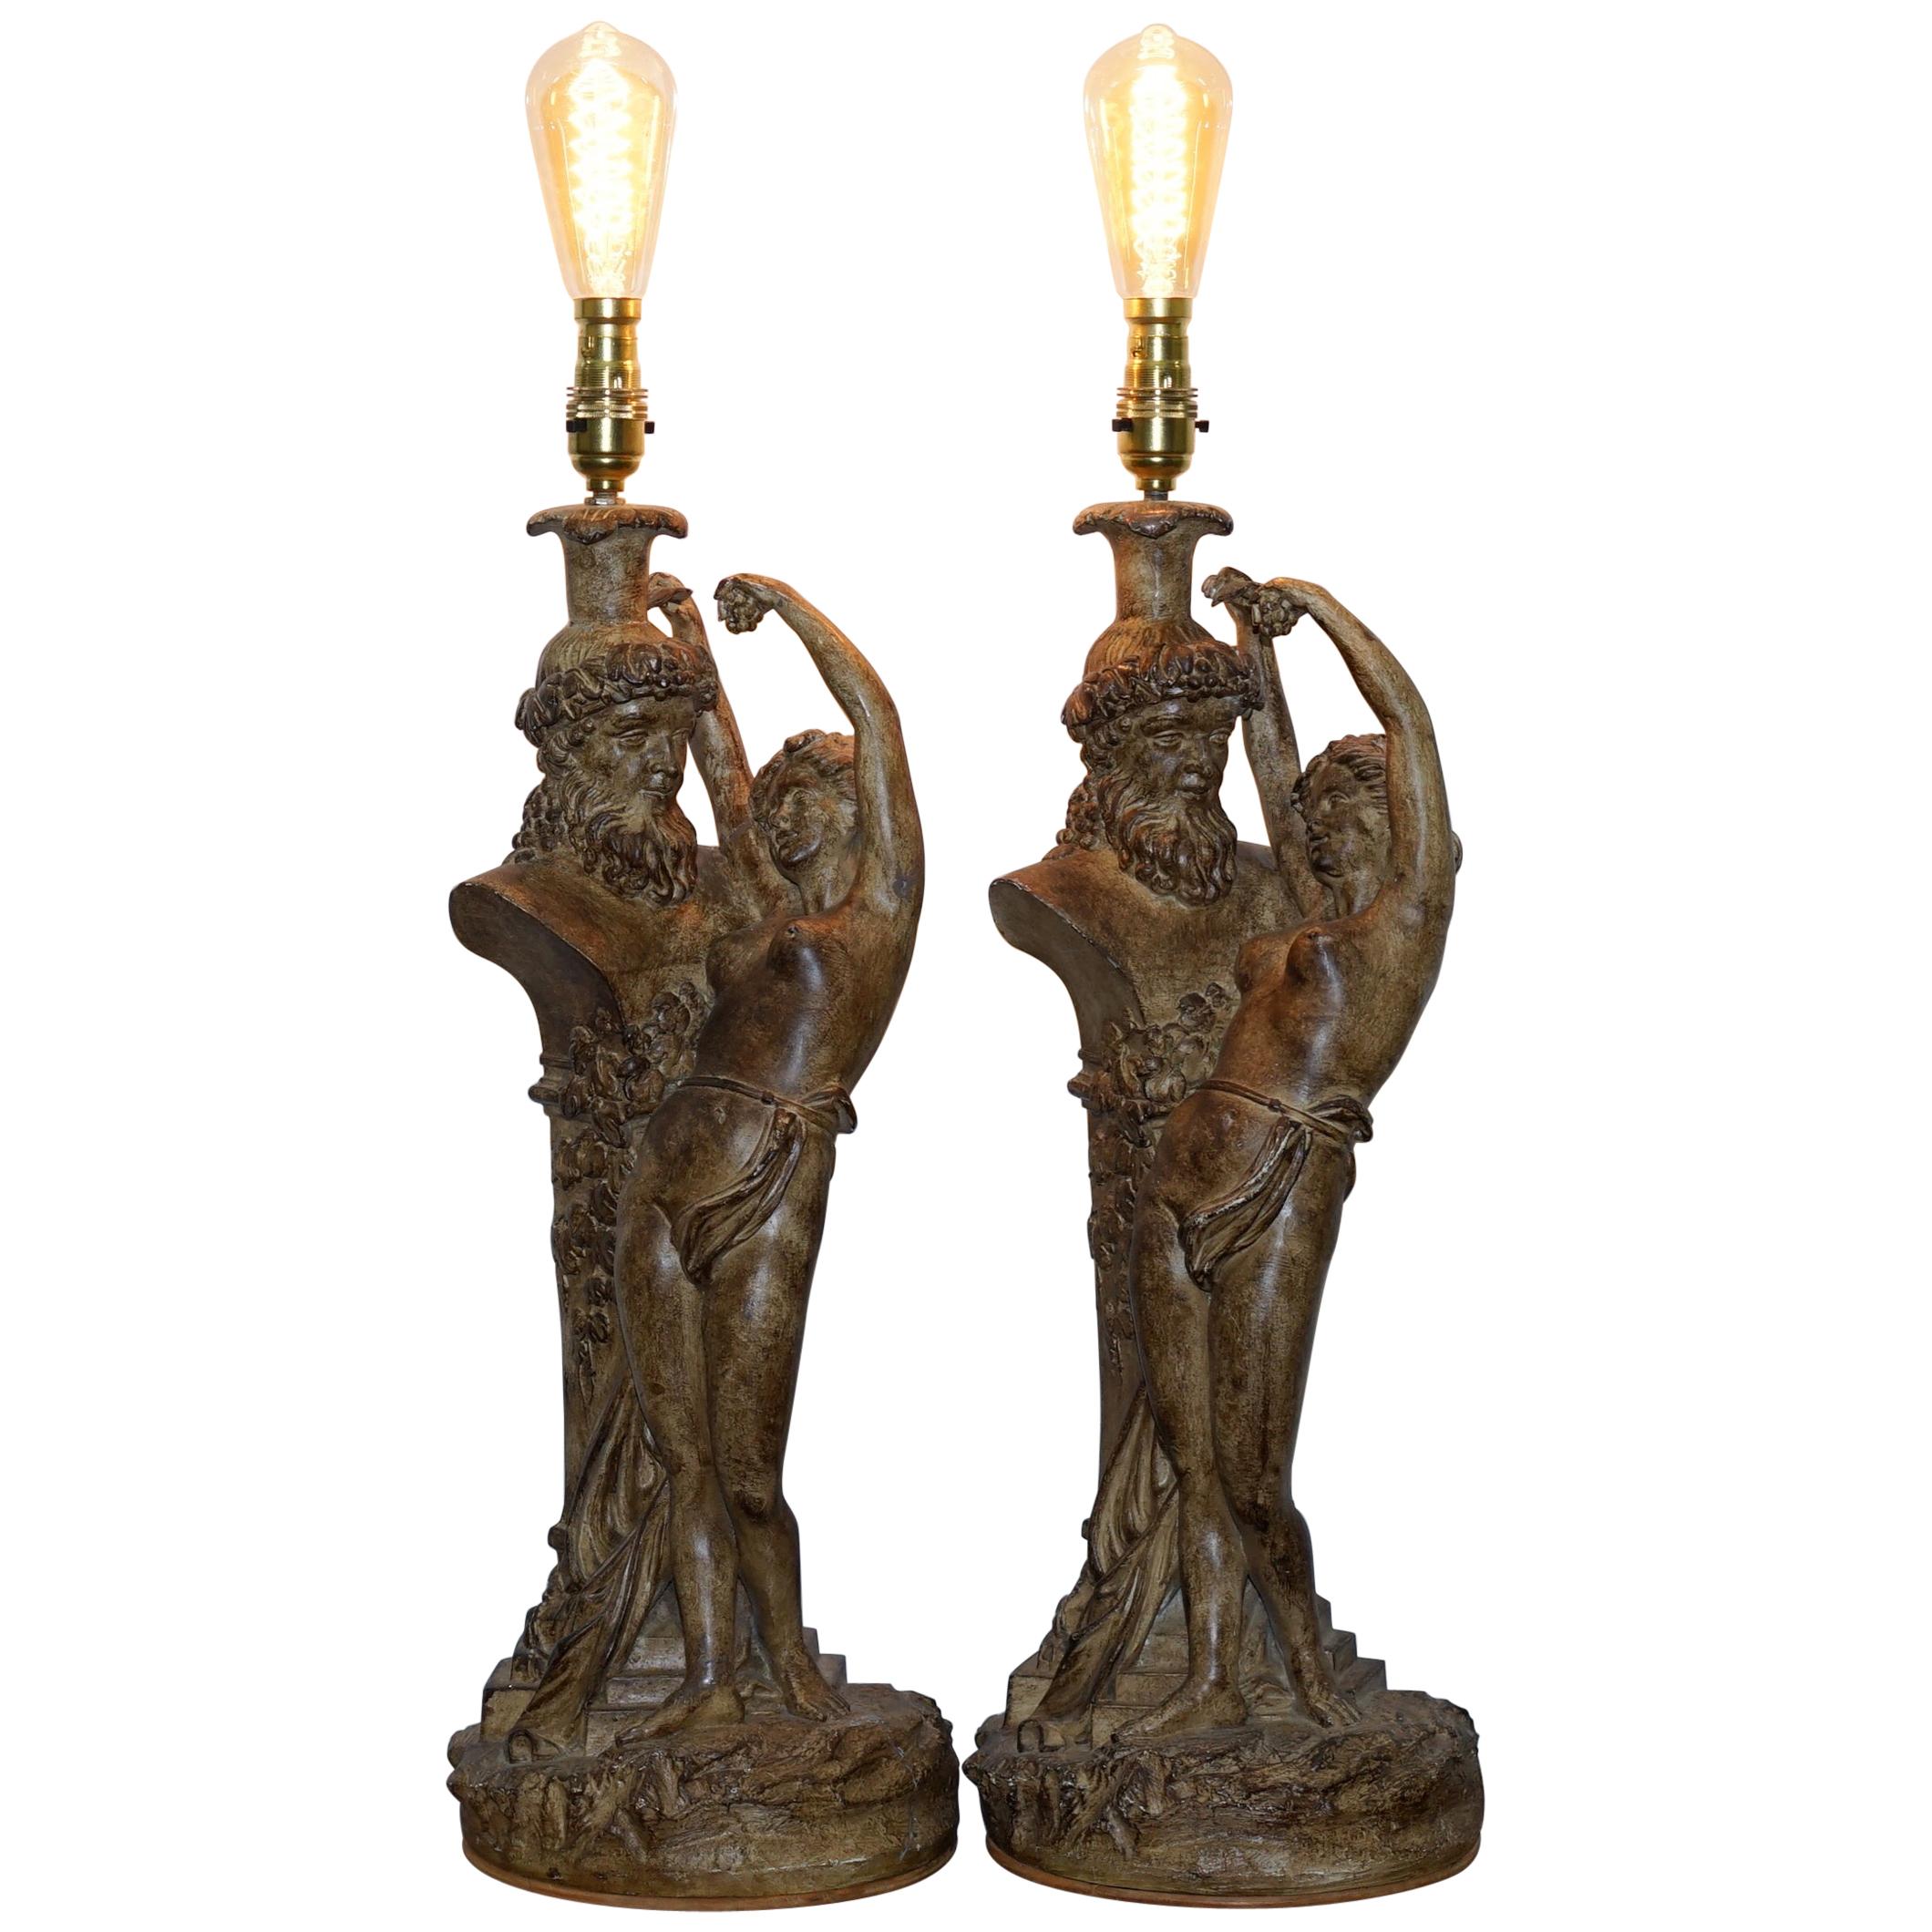 Pair of Vintage Style Maiden Seducing Zeus Statue Table Lamps Nicely Decorative